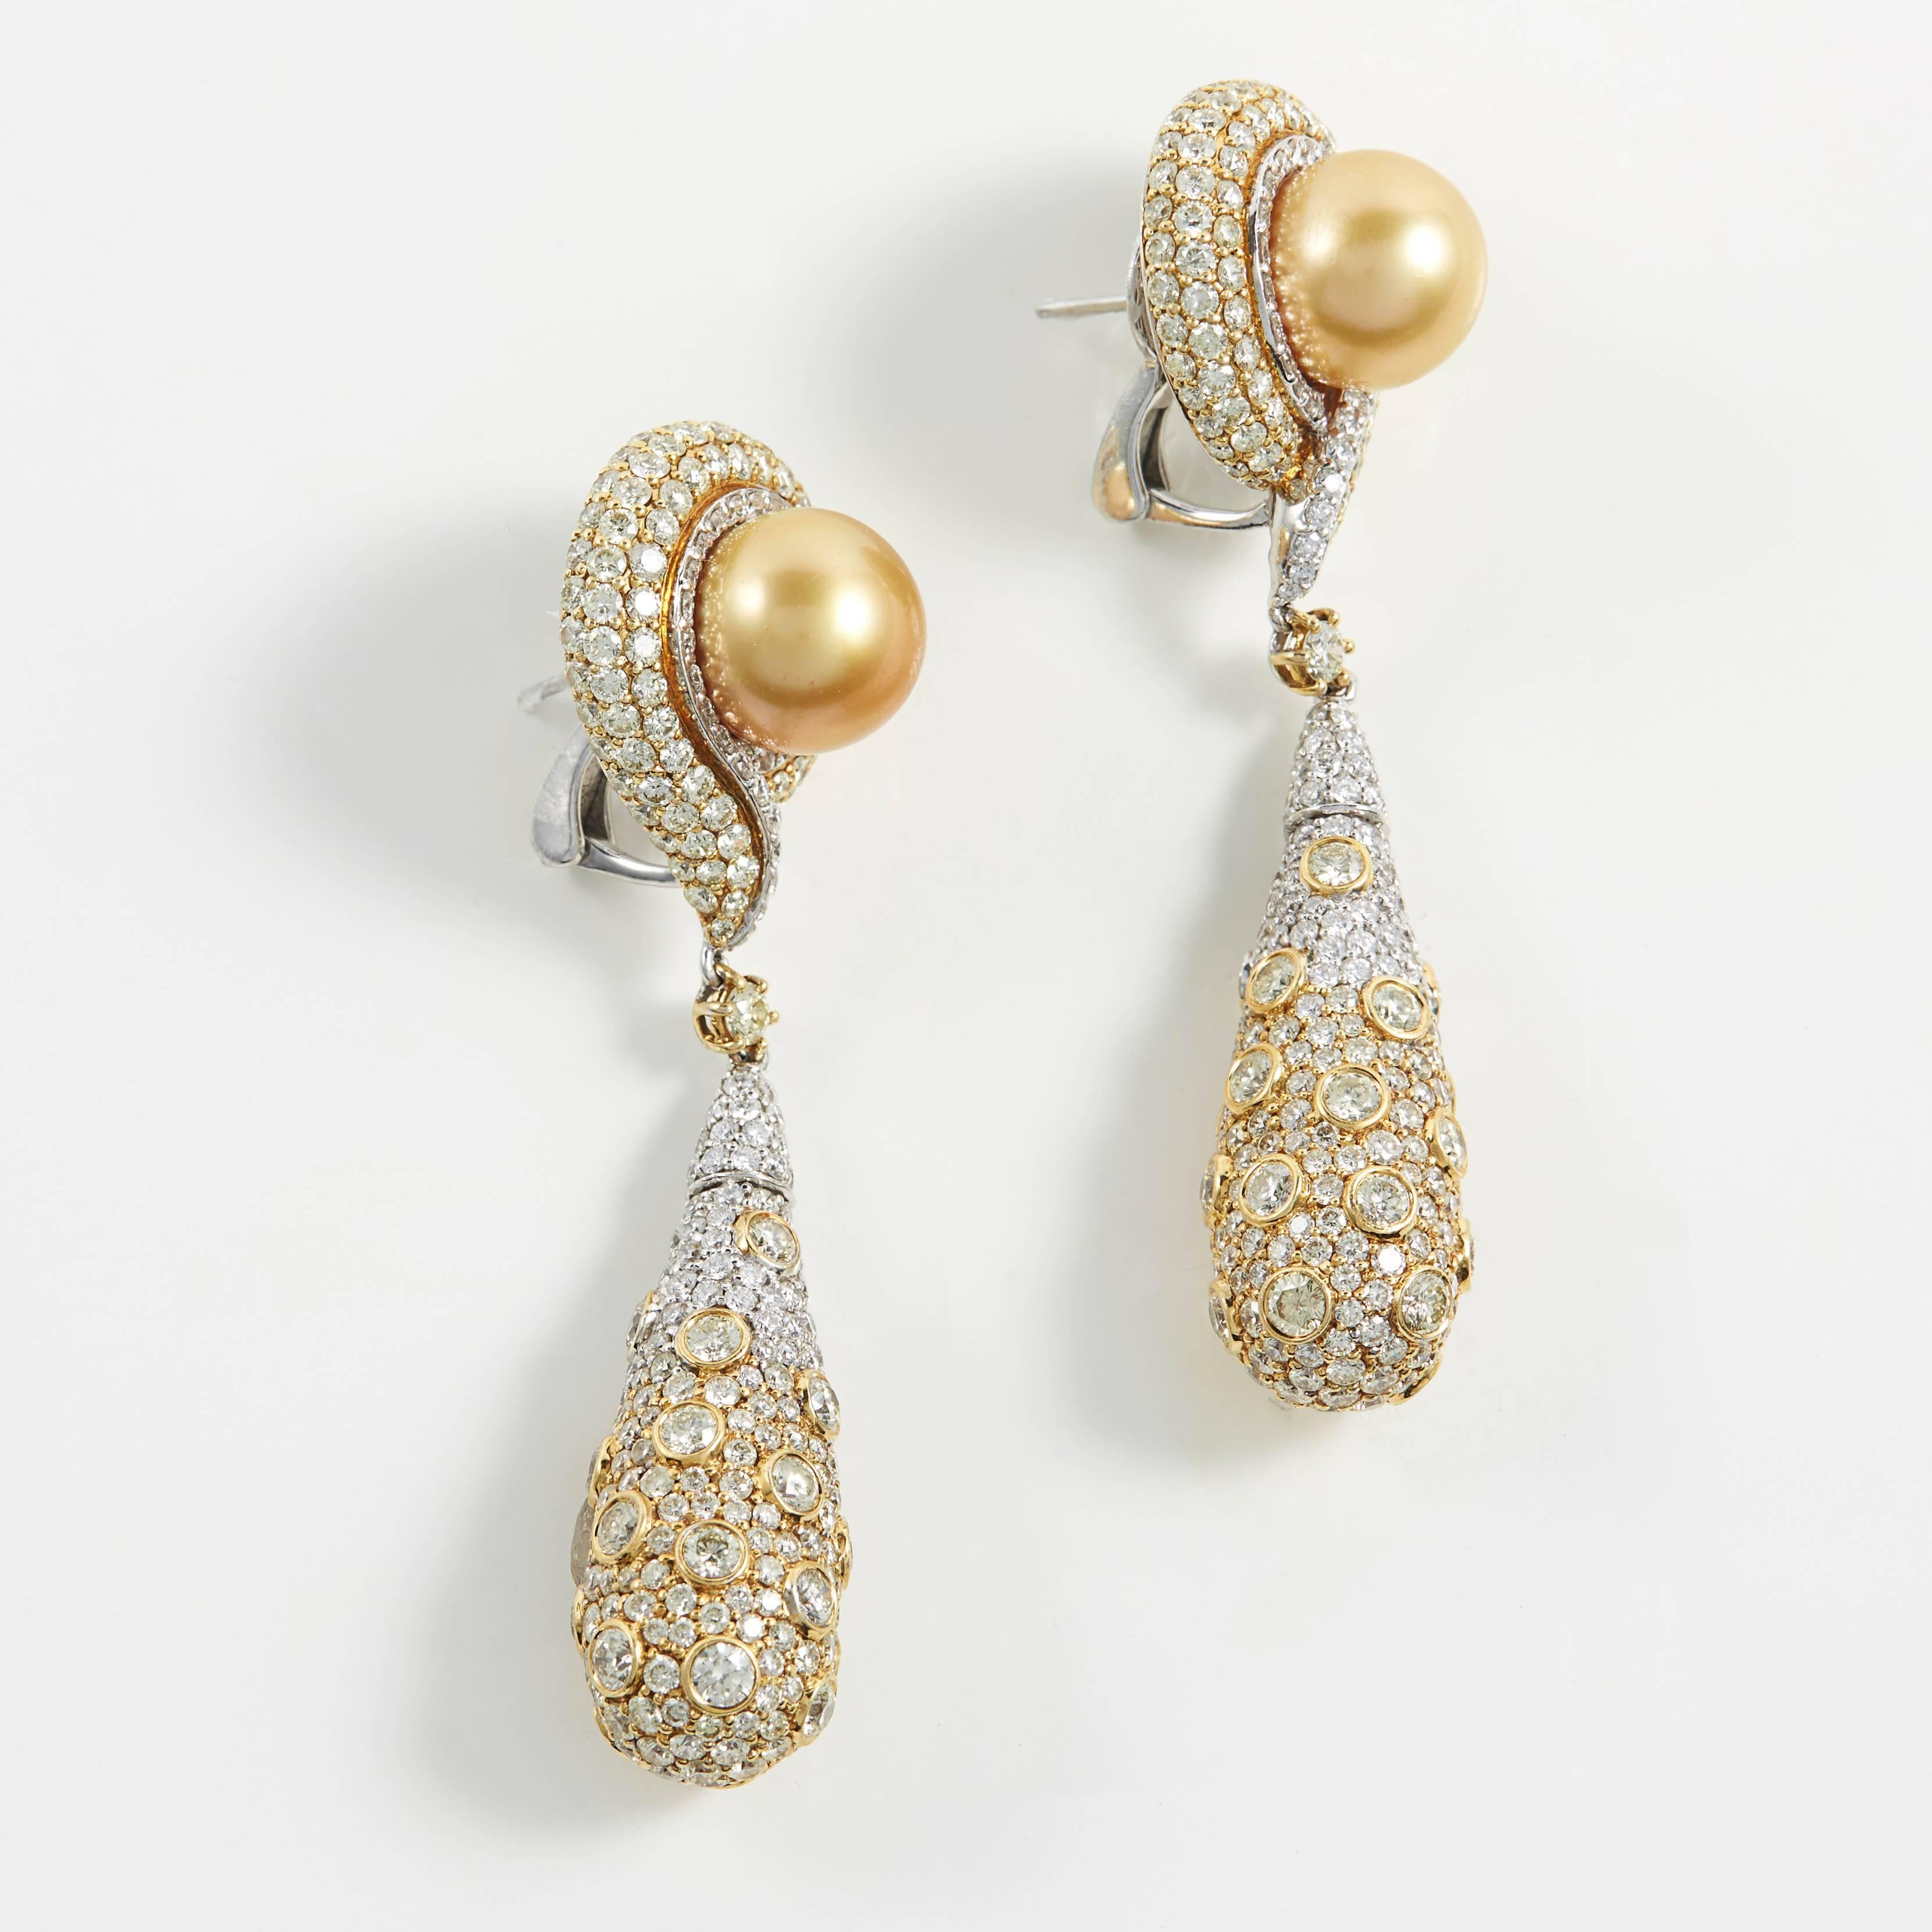 SAM.SAAB 18k yellow gold with  10mm golden south sea pearl and 5.73ct yellow diamonds as well as 4.95ct white diamonds. This earrings length is approximately 3 inches.